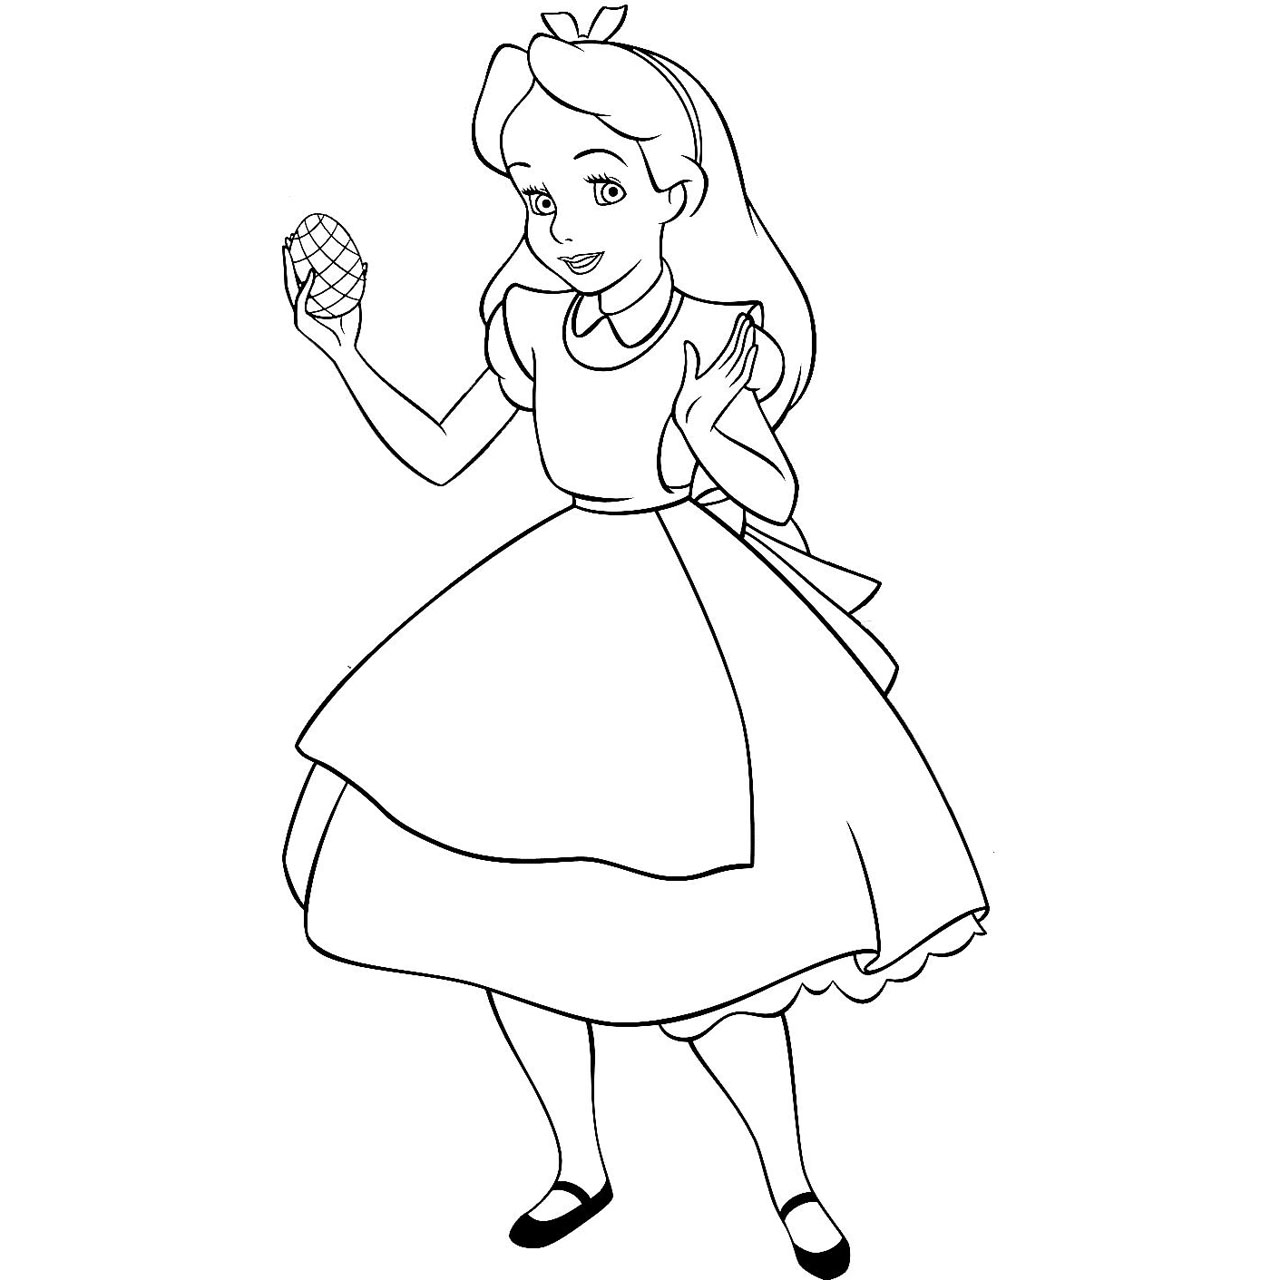 Free Disney Easter Coloring Pages Alice in Wonderland with Easter Egg printable